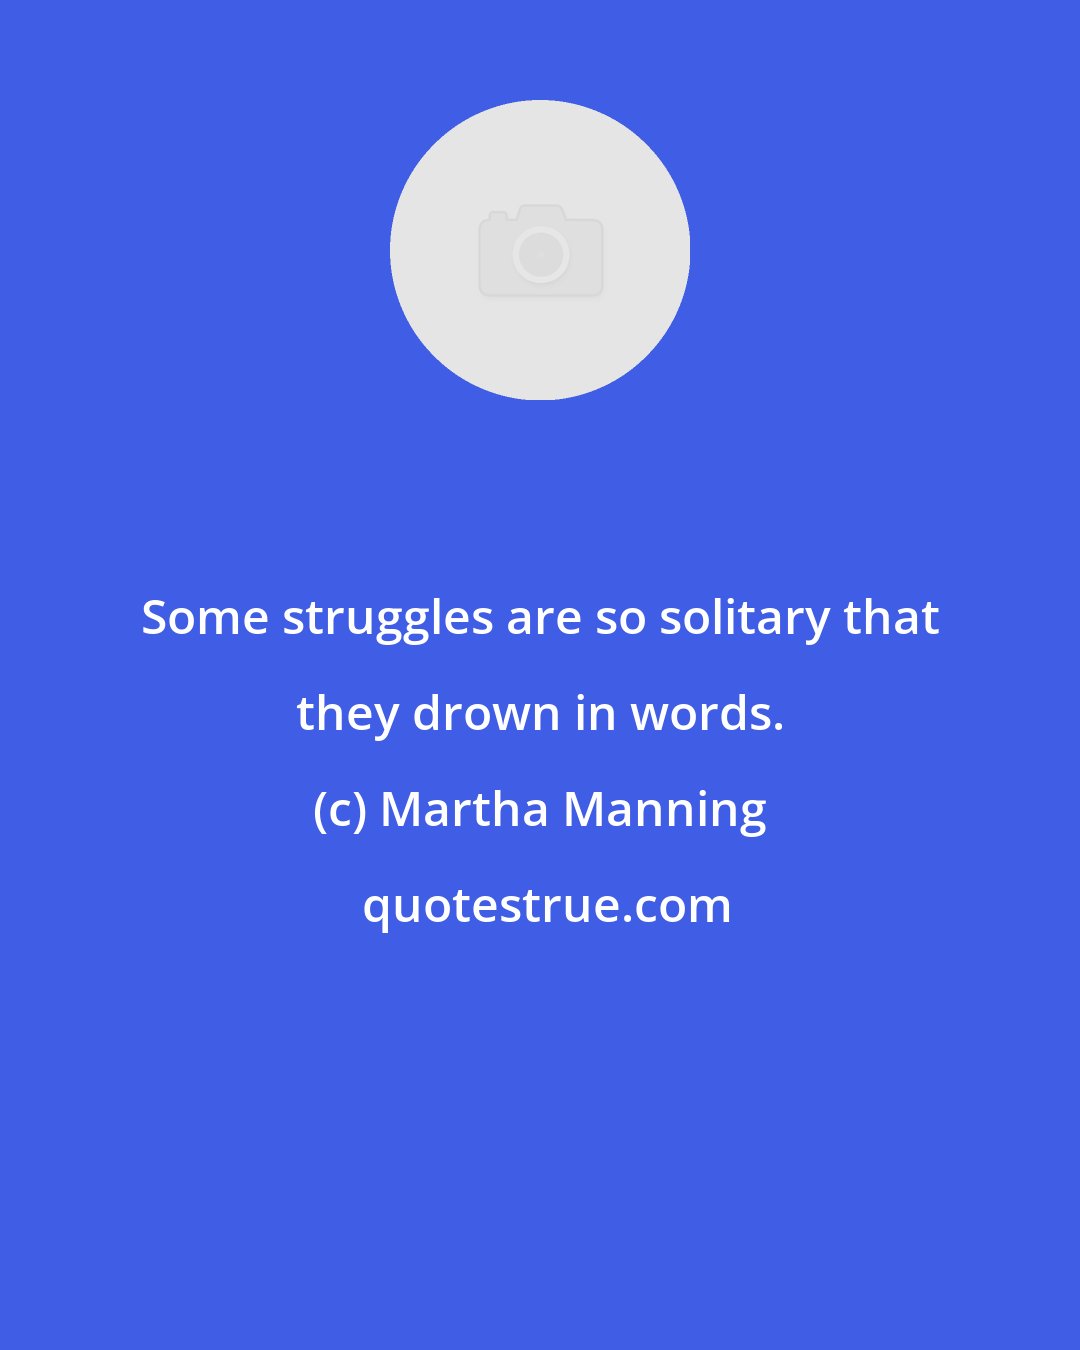 Martha Manning: Some struggles are so solitary that they drown in words.